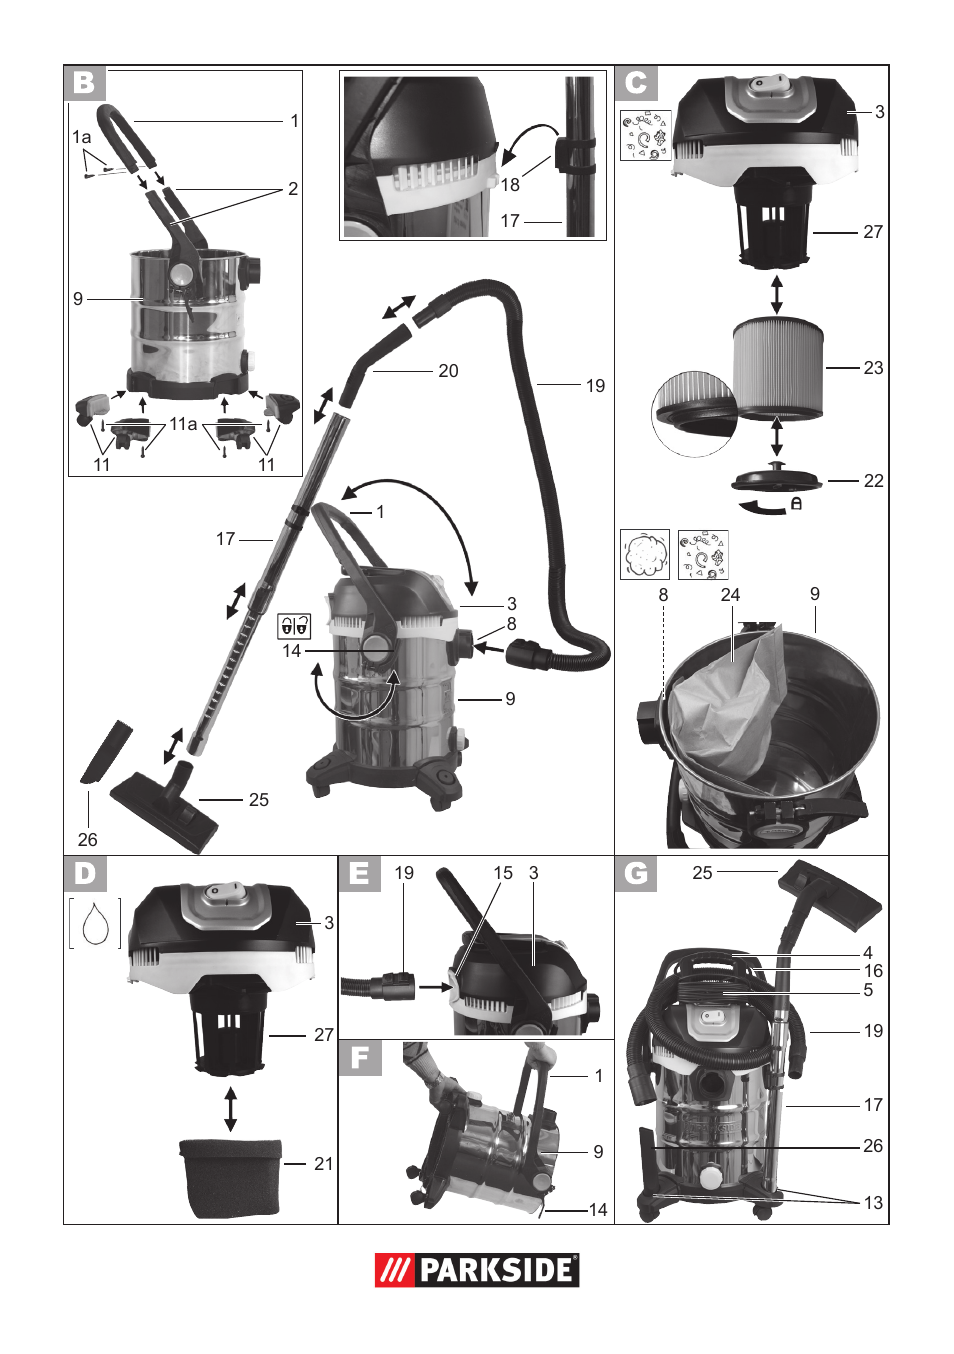 Parkside PNTS 1400 D1 User Manual | Page 86 / 88 | Also for: PNTS 1400 C1